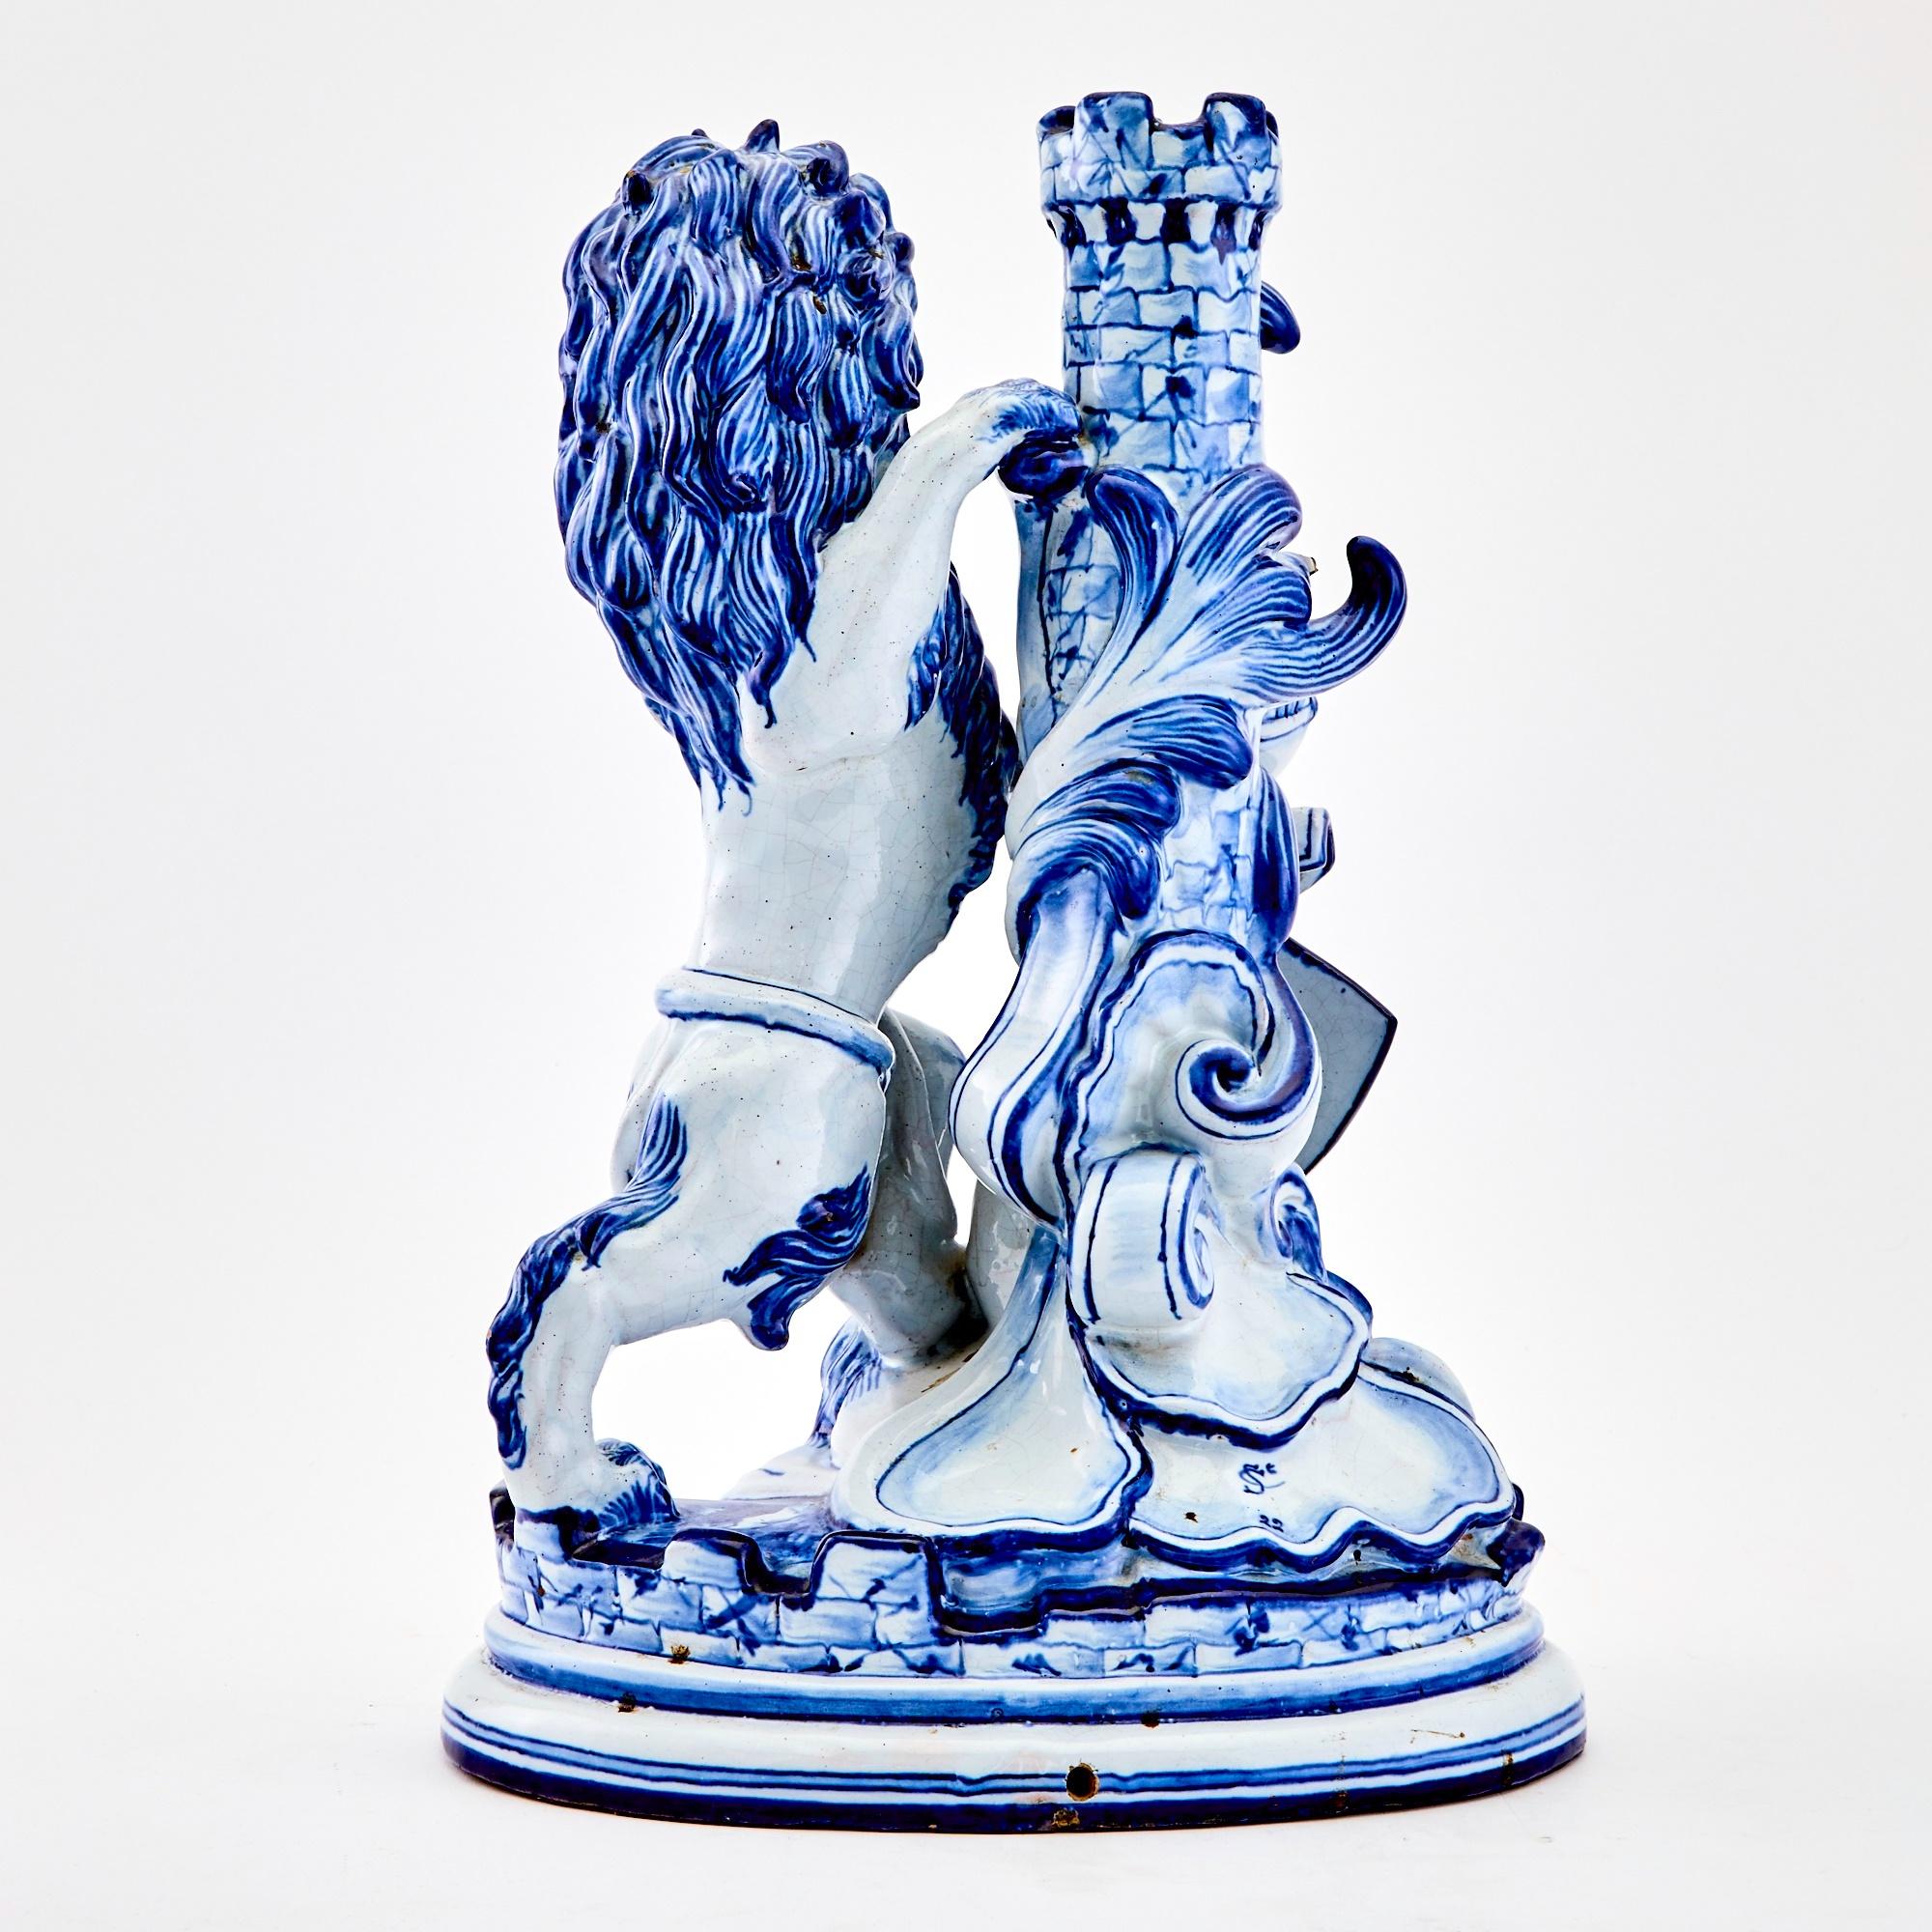 Transport yourself to the elegance of the early 19th century with this exceptional Dutch Delft sculpture—an enchanting portrayal of a lion proudly cradling a family shield crest. Crafted with meticulous artistry, the lion captivates with its